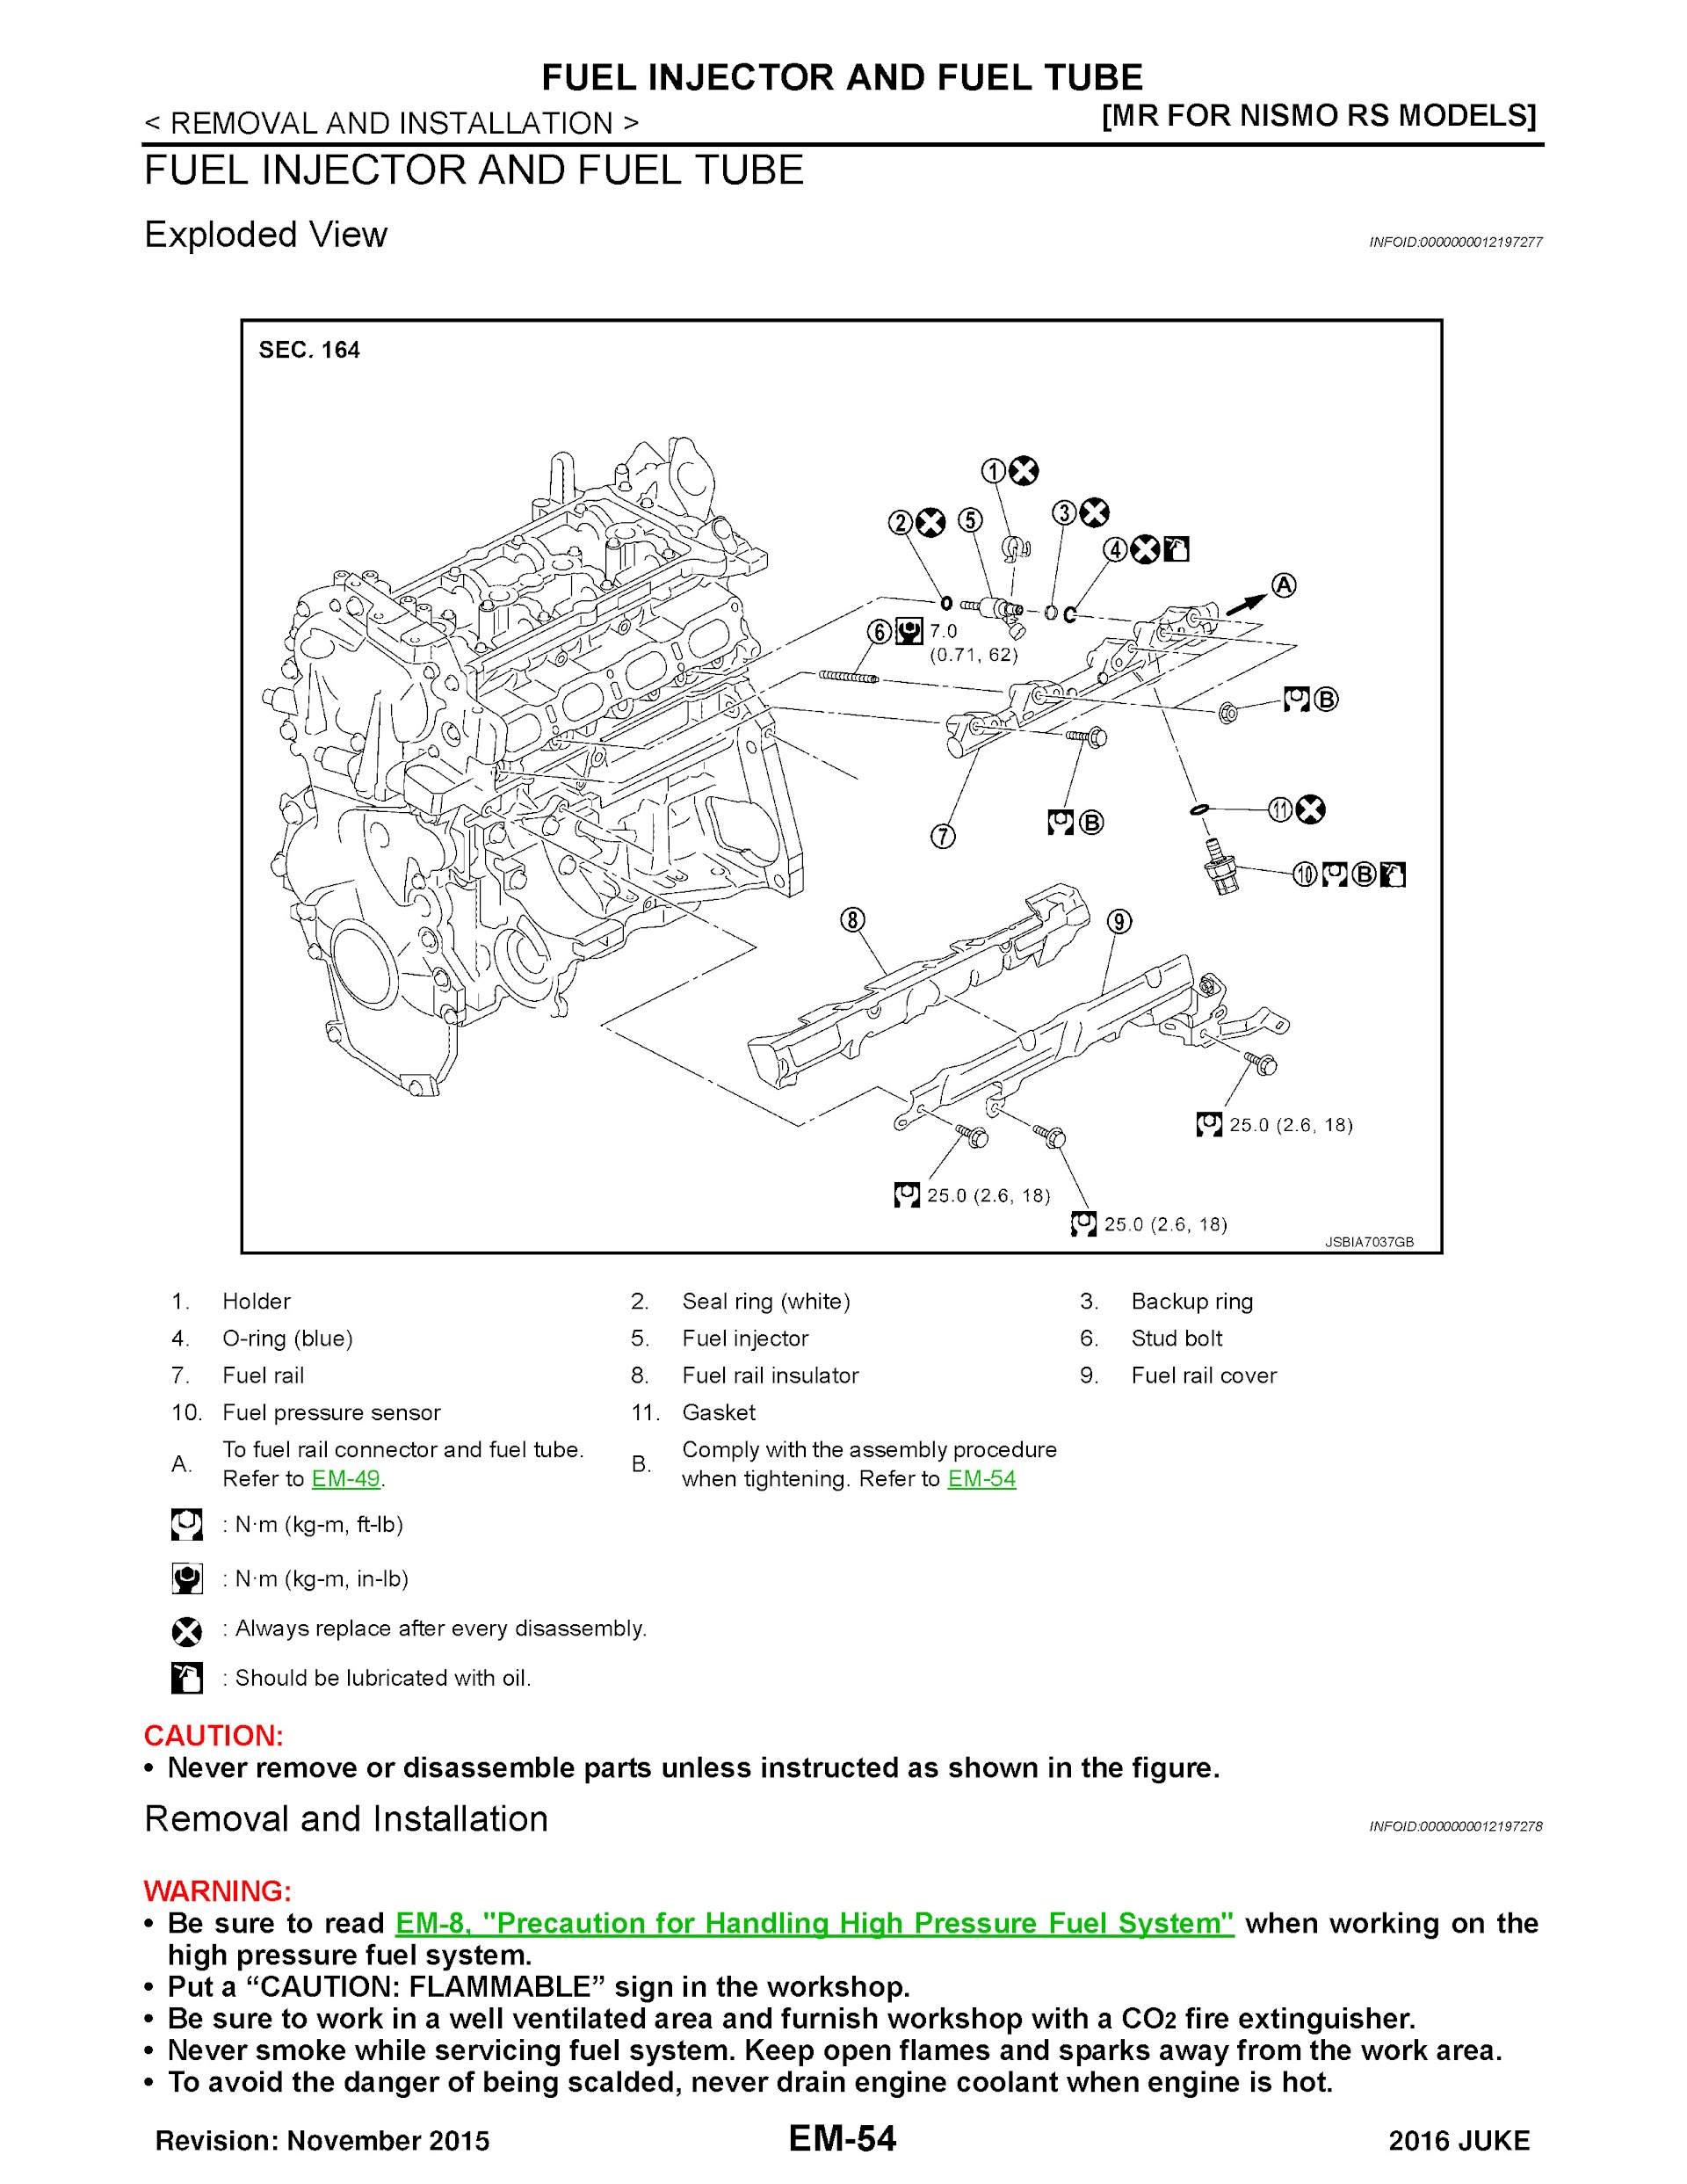 CONTENTS: 2016 Nissan Juke Repair Manual, Fuel Injector and Fule Tube Removal and Installation